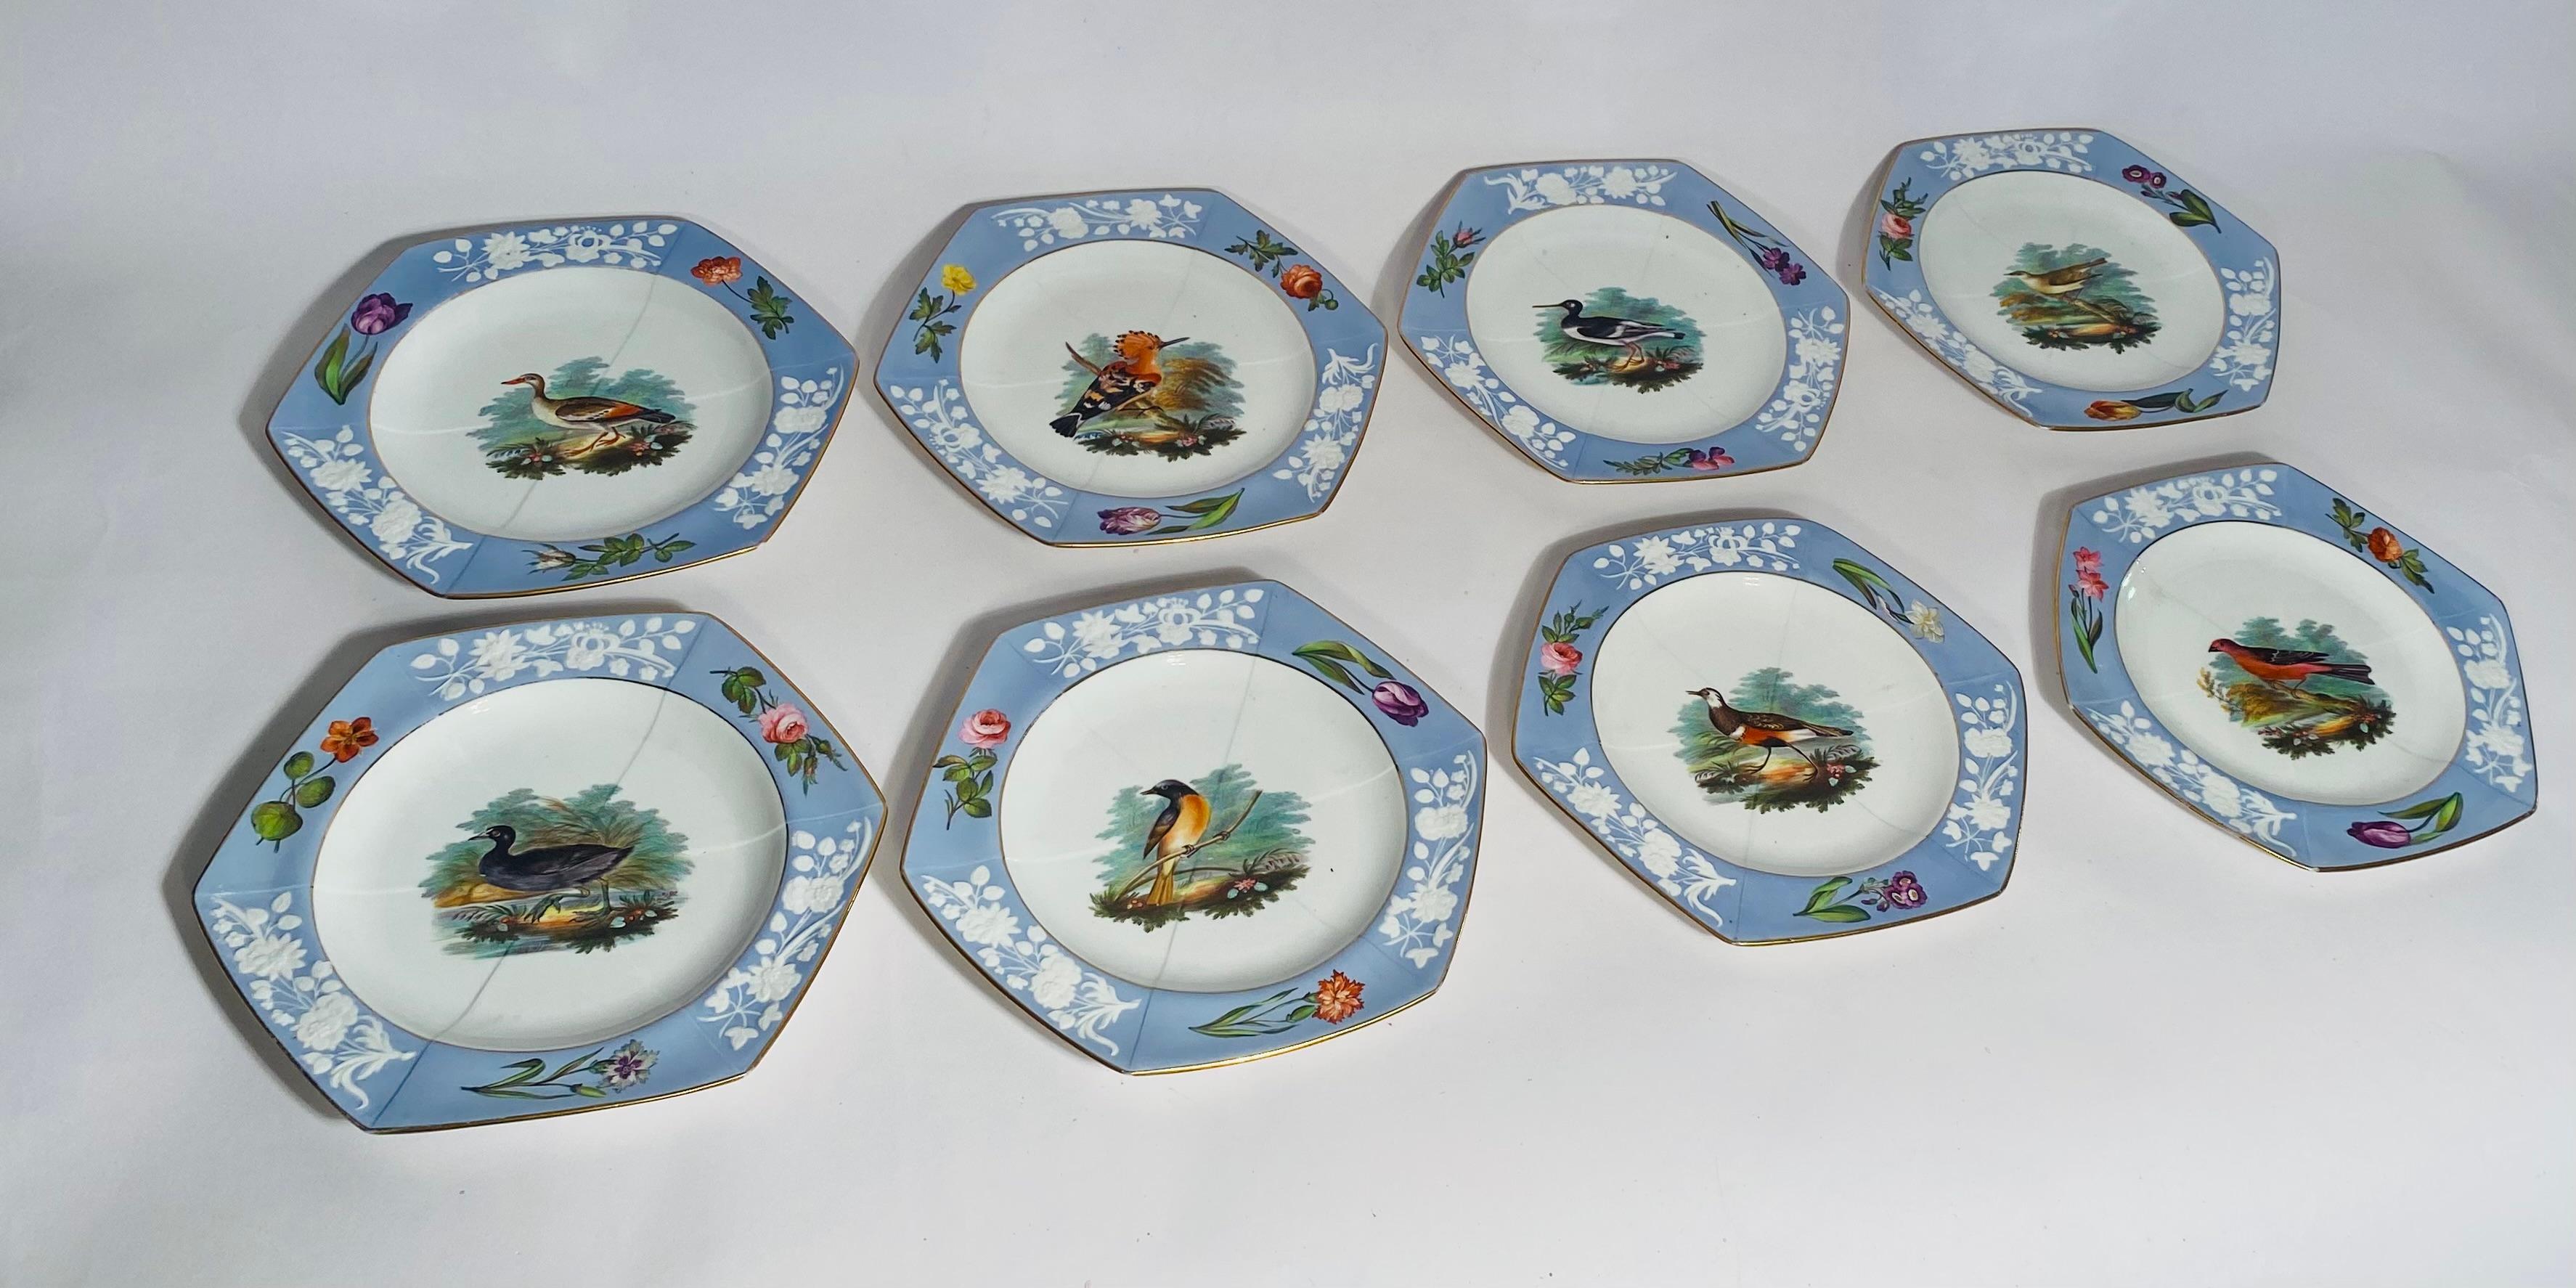 Antique English Periwinkle Blue Dessert Service for 16, Spode Circa 1820  In Good Condition For Sale In West Palm Beach, FL